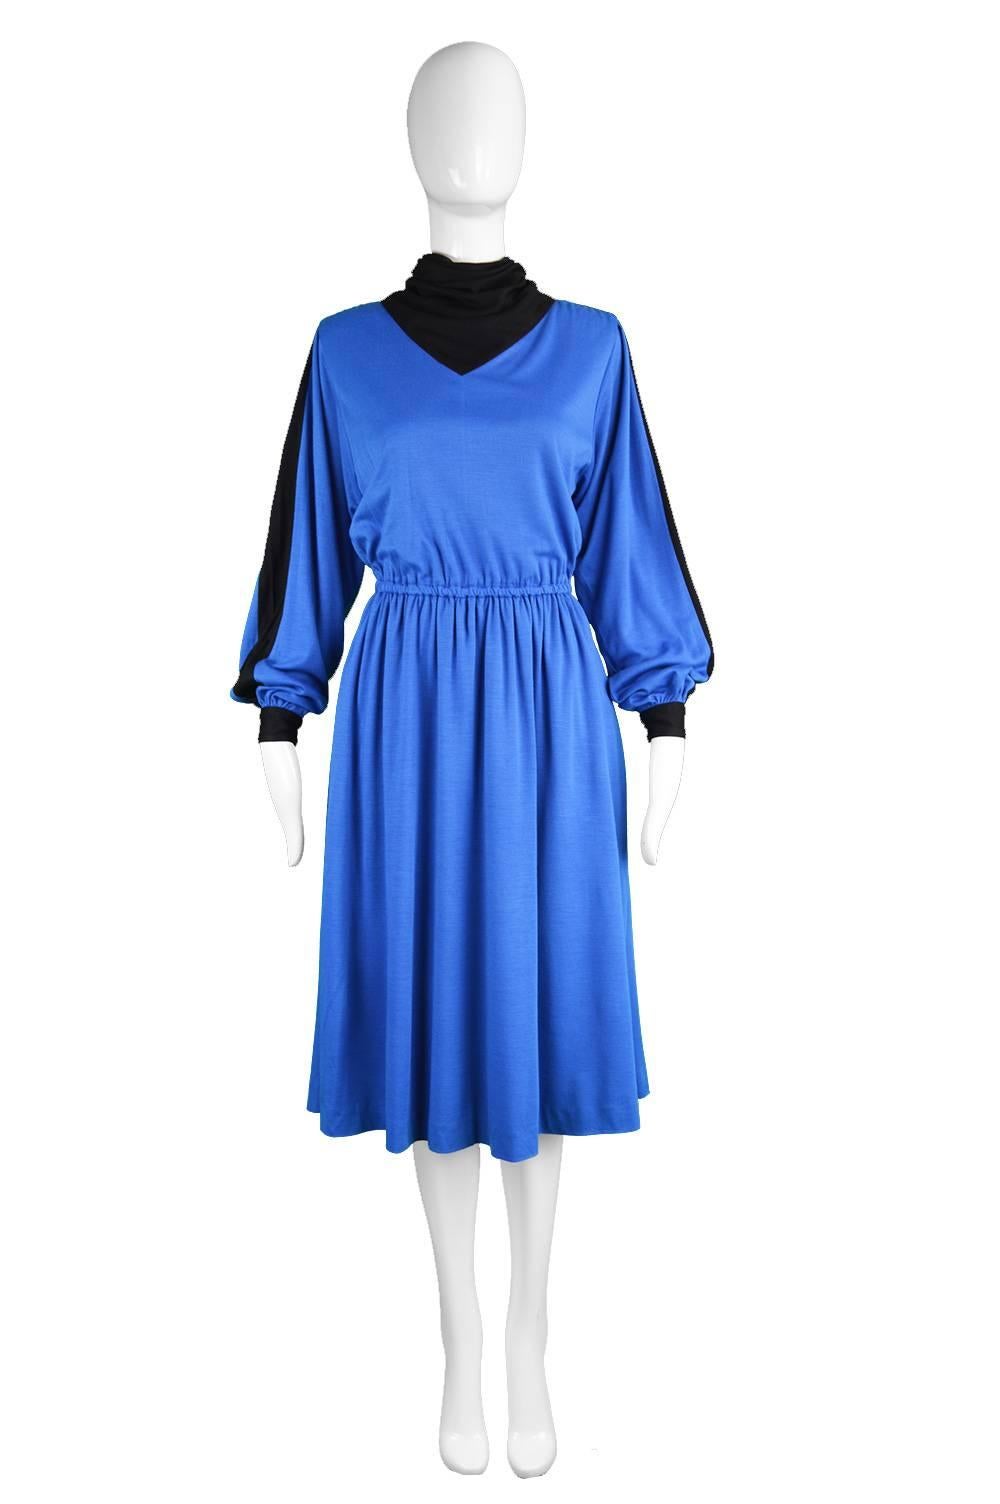 A chic vintage dress from the early 80s by luxury Swiss label, Akris. In a blue wool blend fabric with a black cowl neck and stripes down each sleeve. The top is voluminous for a casual look with an elasticated waist that creates a flattering